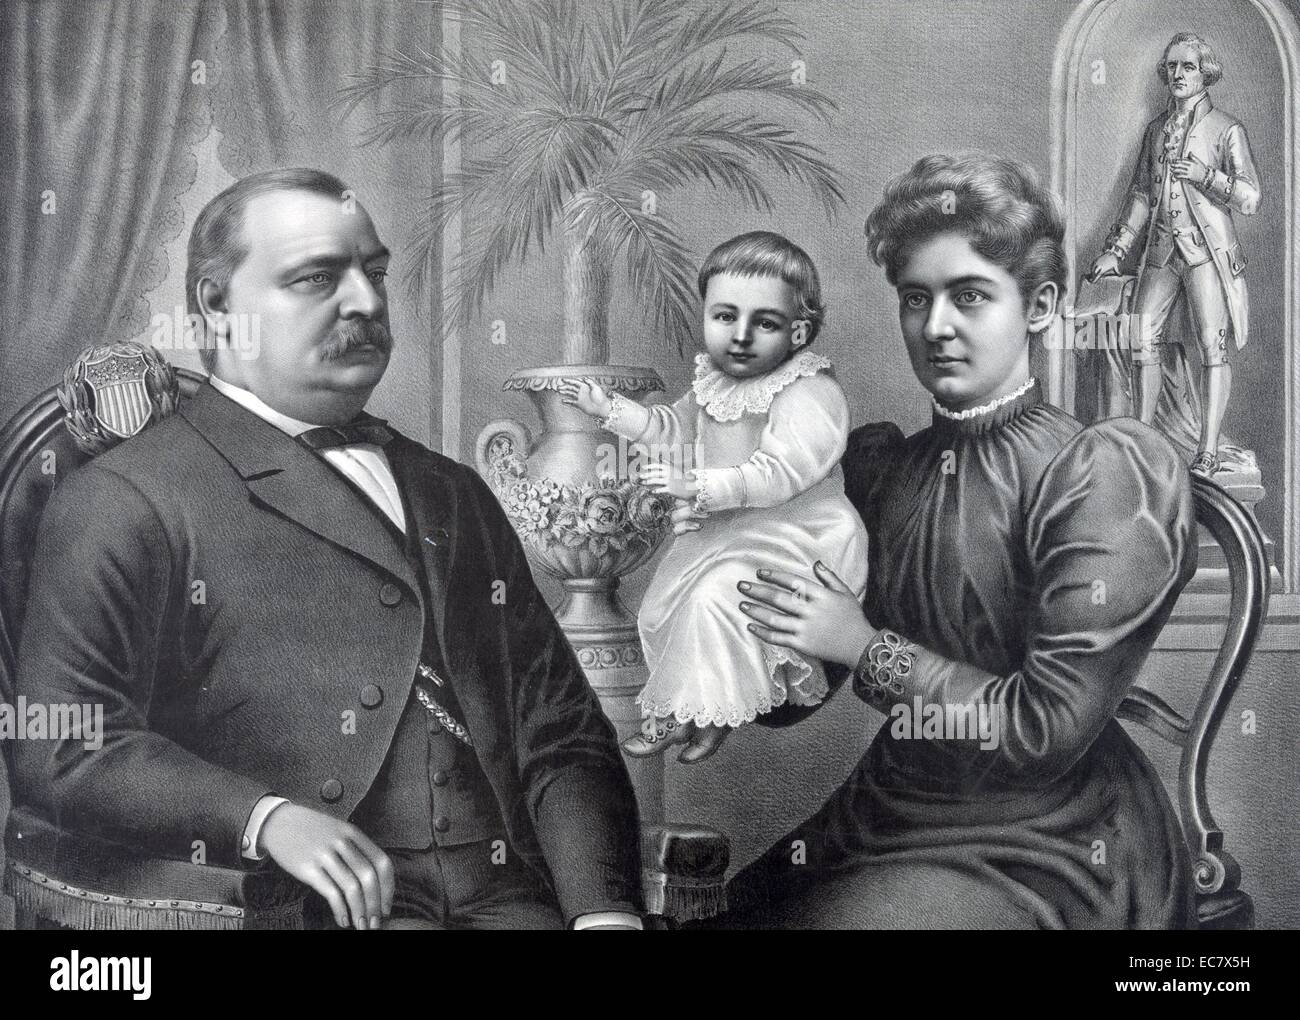 President Grover Cleveland with his wife and children. Cleveland was the 22nd and 24th President of the United States and is the only president to serve two non-consecutive terms and to be counted twice in the numbering of the presidents. Stock Photo